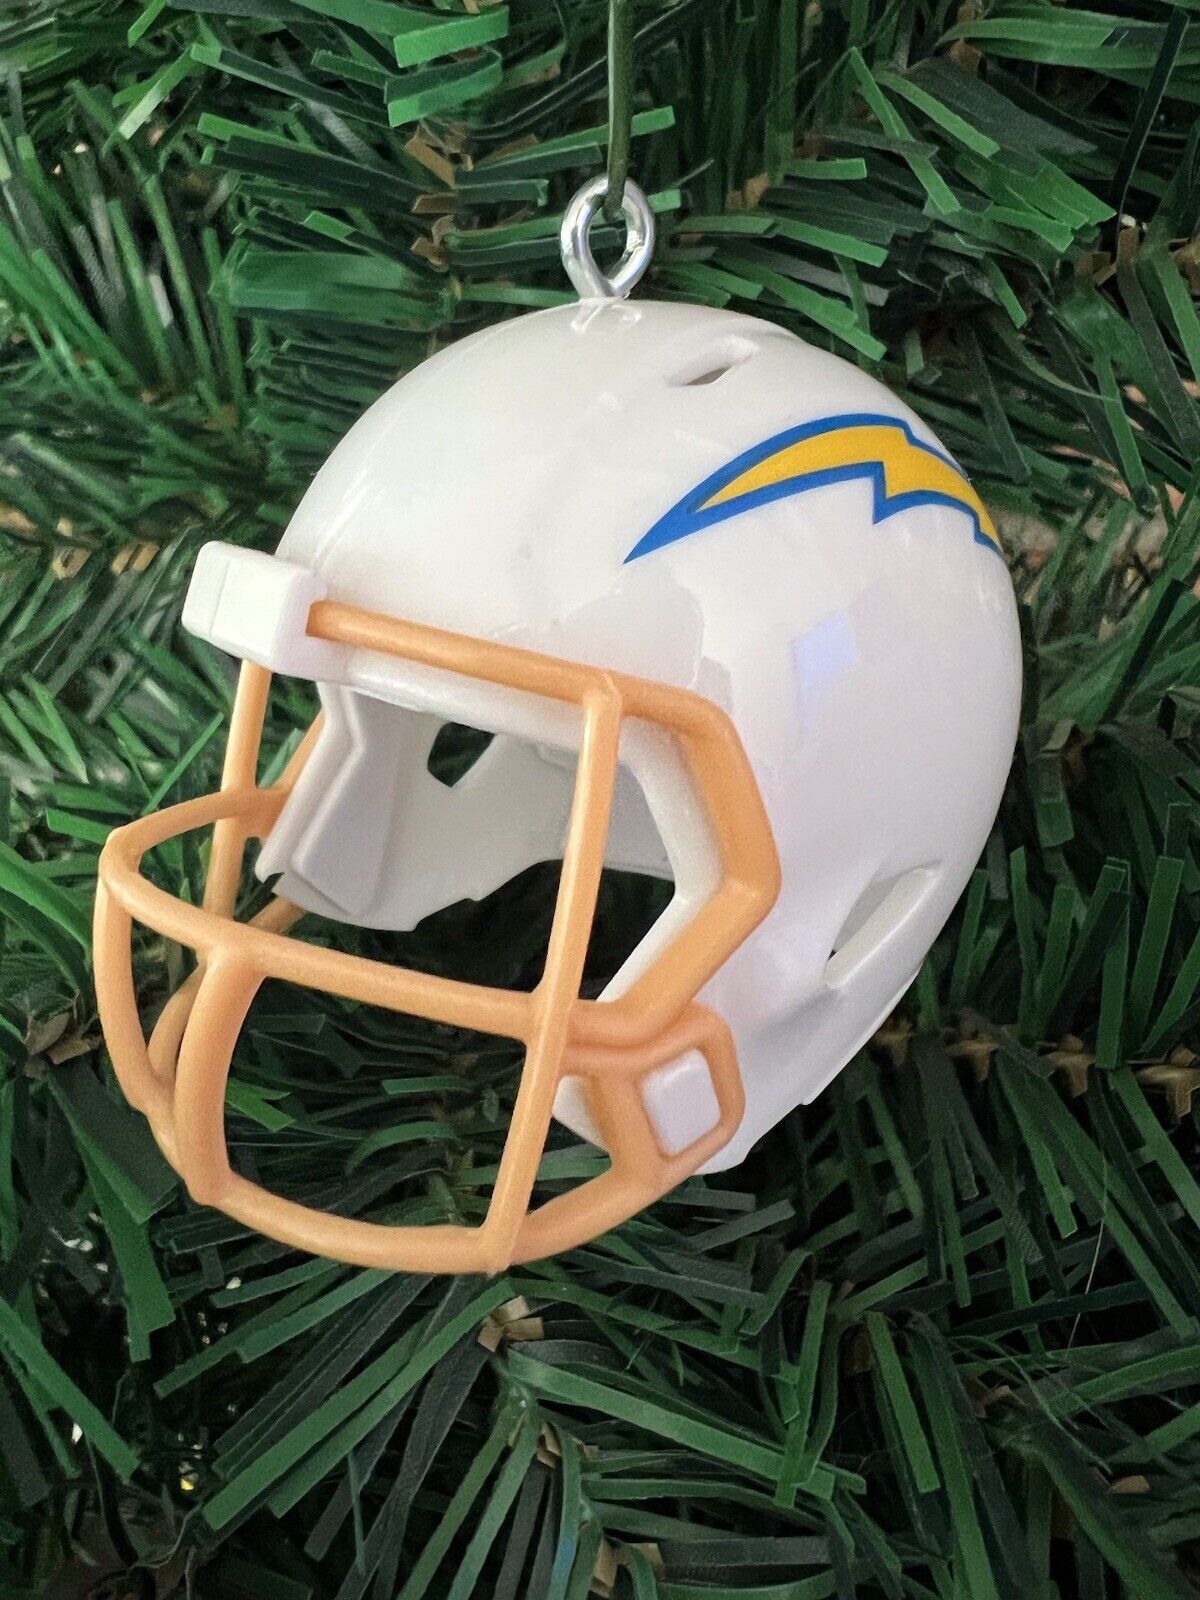 Los Angeles Chargers Helmet Christmas Ornament Purchase supports education